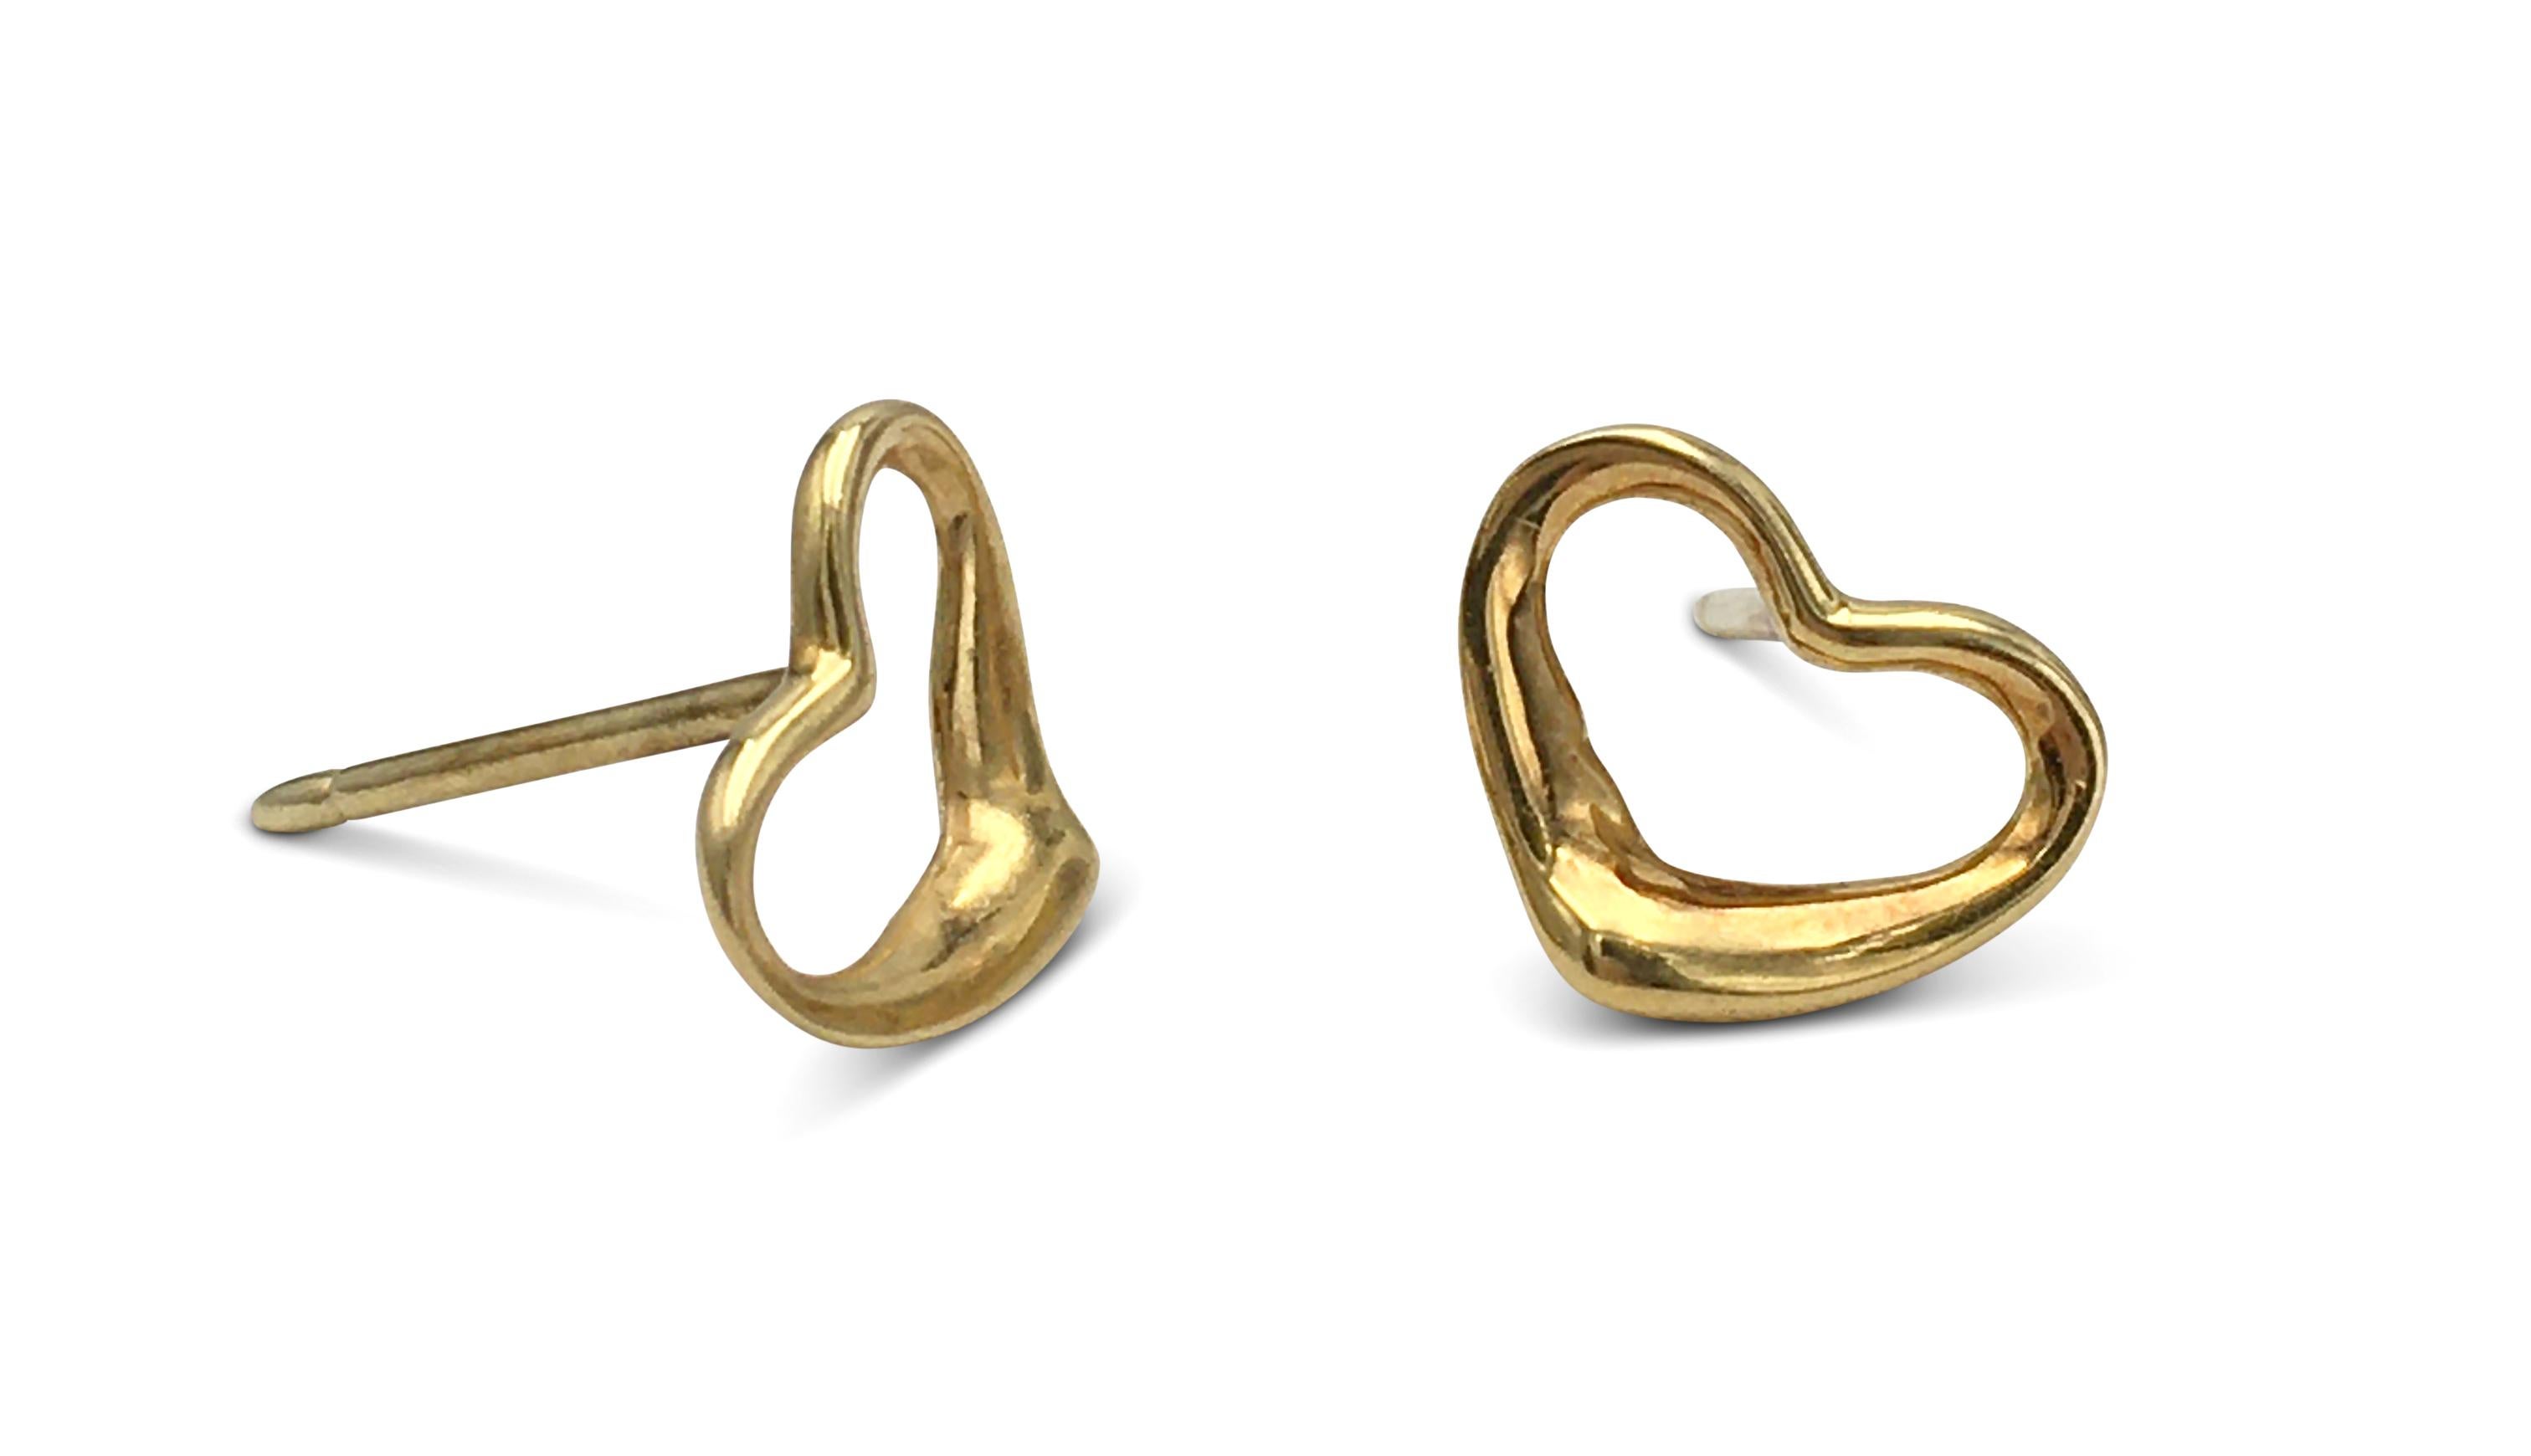 Authentic Elsa Peretti for Tiffany & Co. open heart earrings crafted in 18 karat yellow gold. Signed T&Co., Peretti, 18K. The earrings are presented with the original box, no papers. CIRCA 2000s.